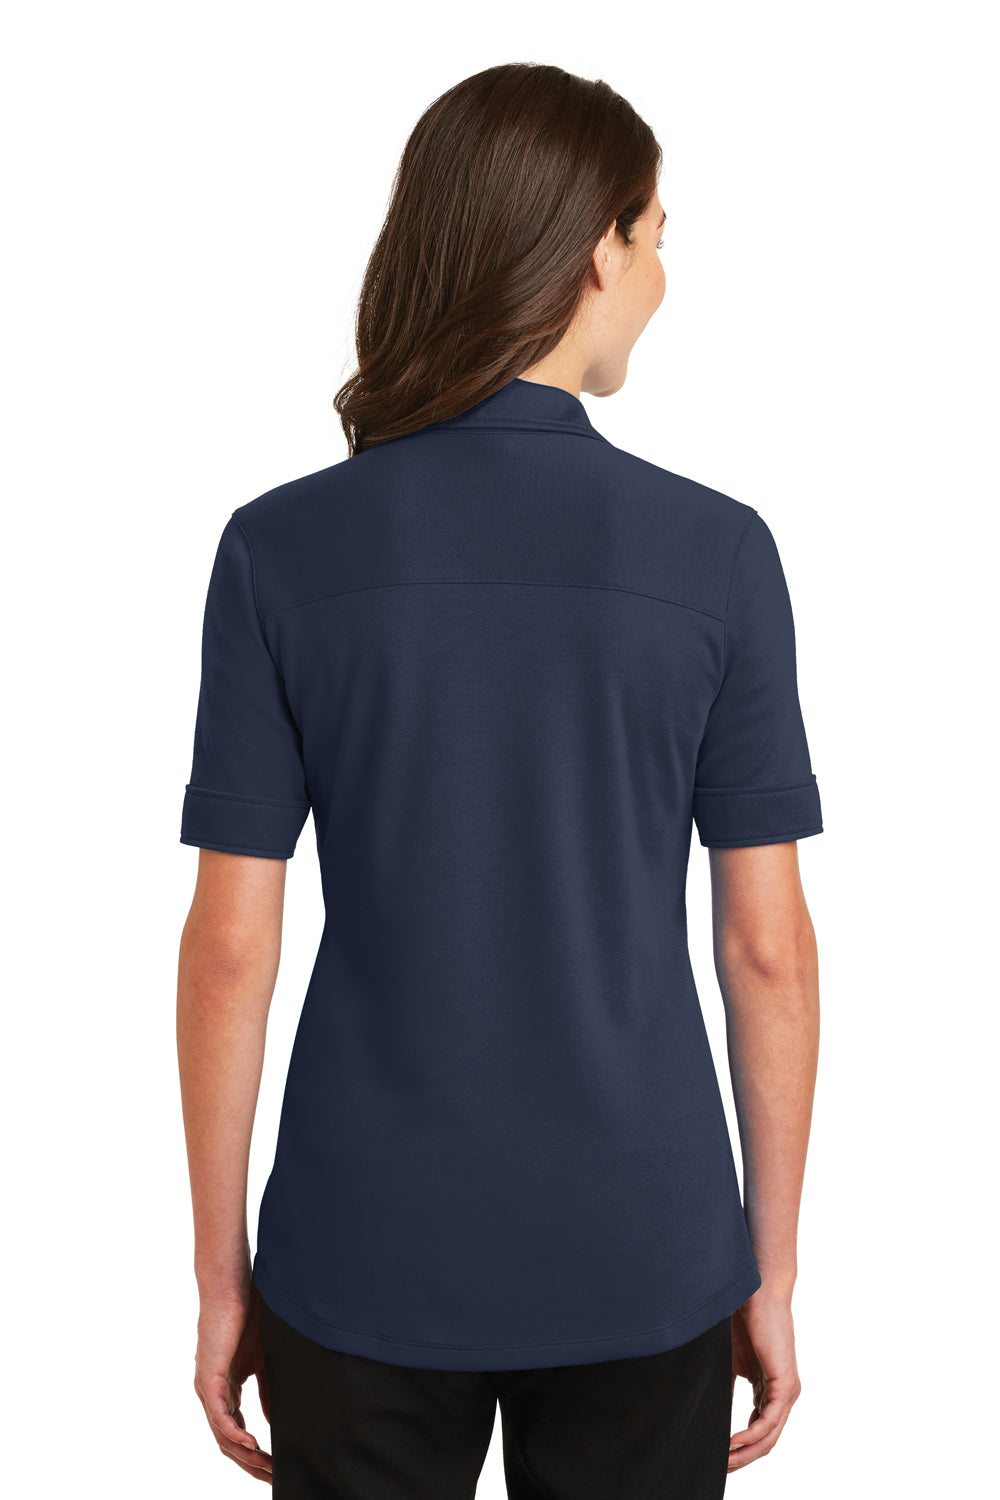 Port Authority L5200 Womens Silk Touch Performance Moisture Wicking Short Sleeve Polo Shirt Navy Blue Back